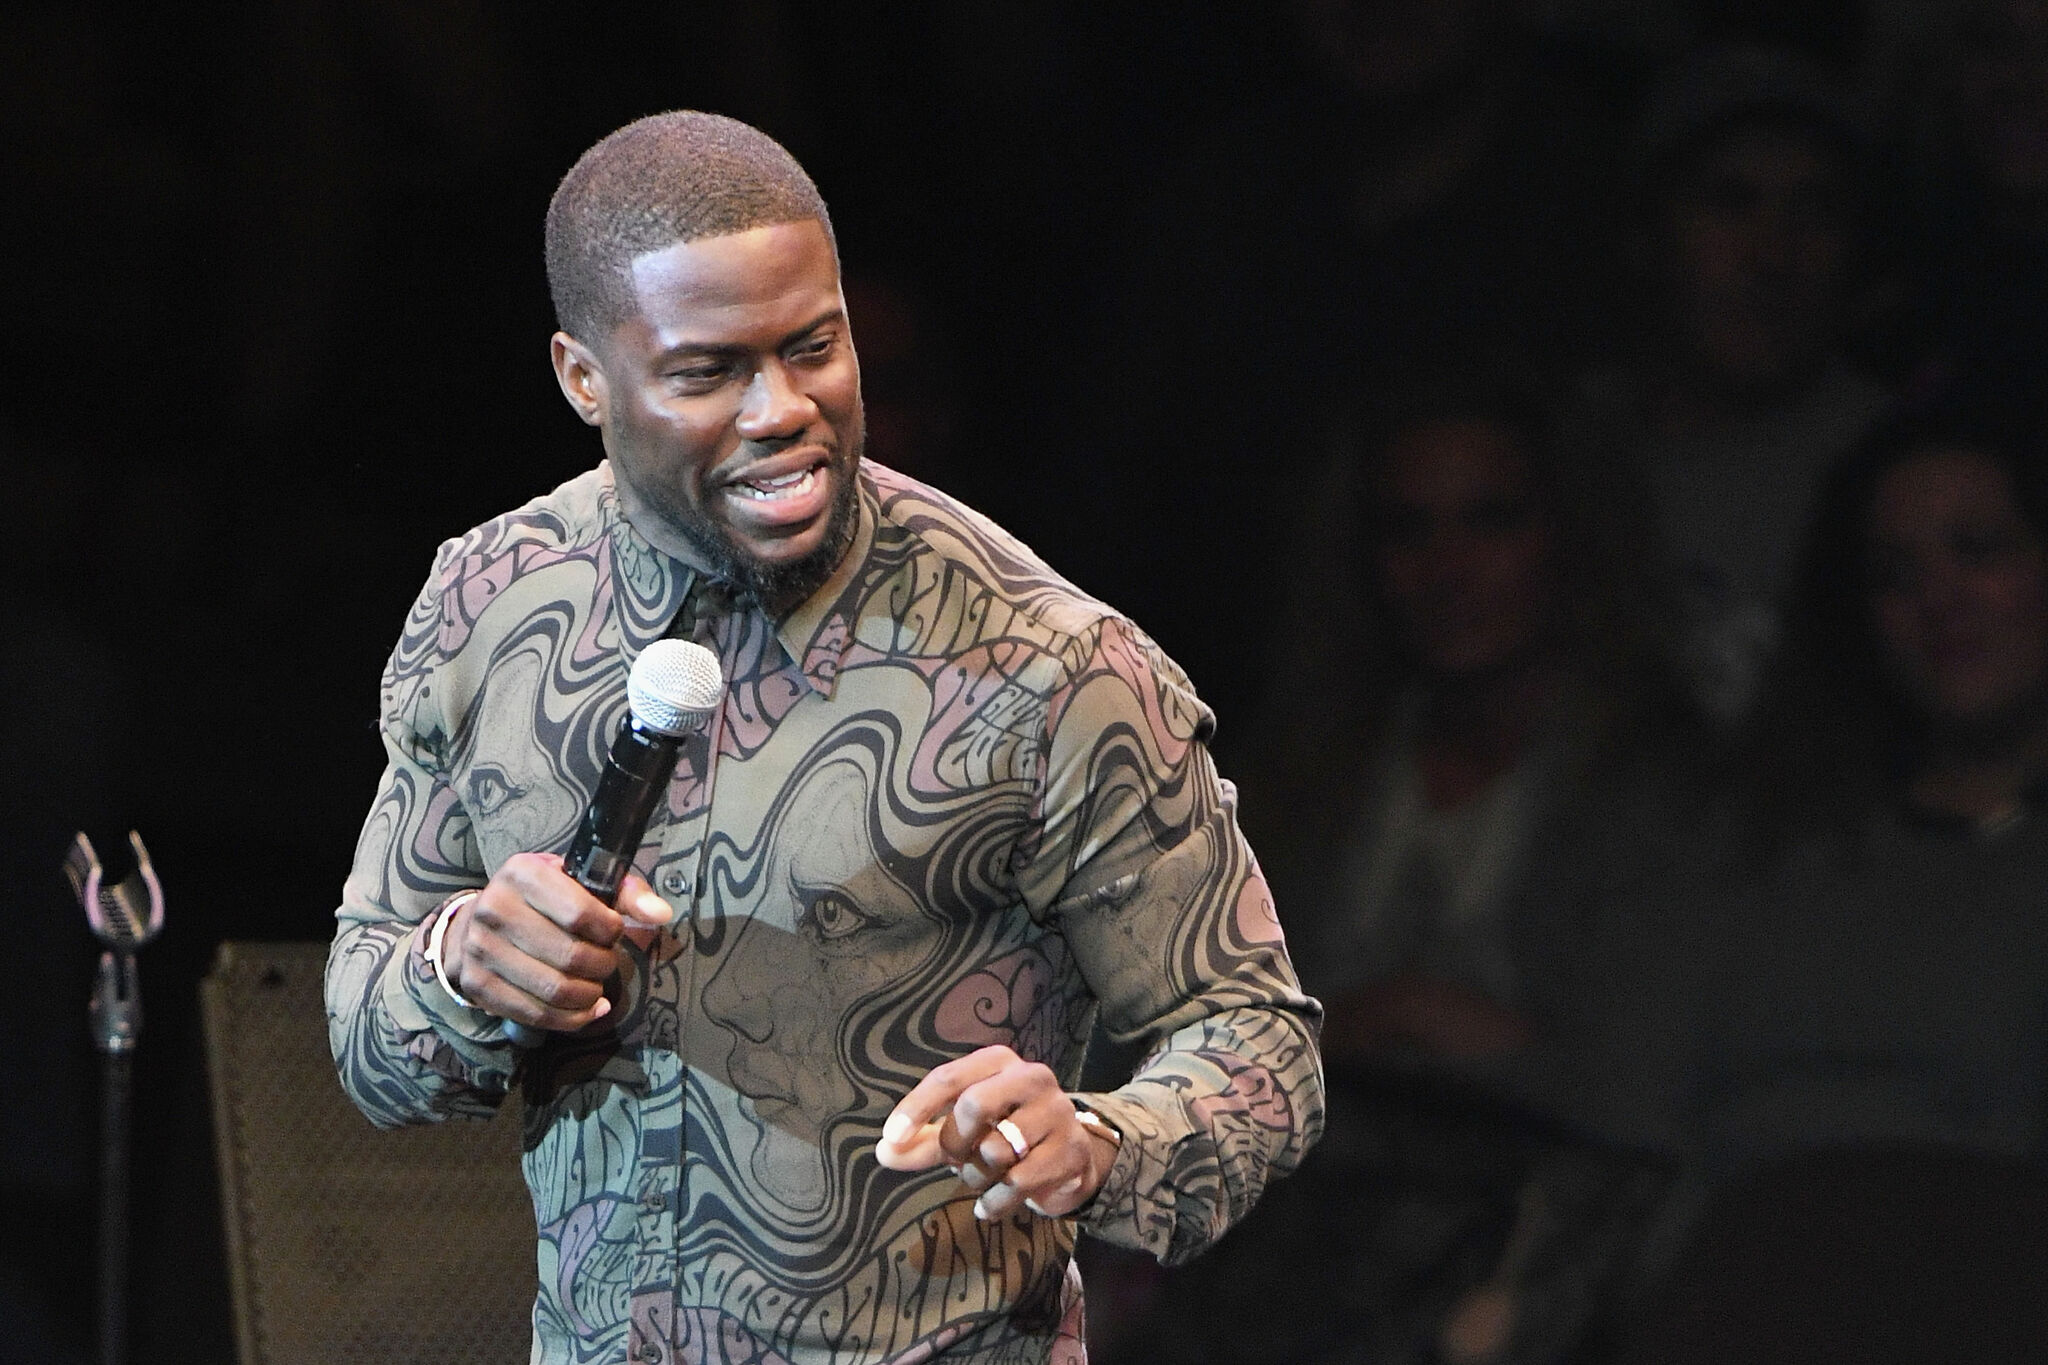 Buy Tickets To Kevin Hart Houston For Less Chron Shopping